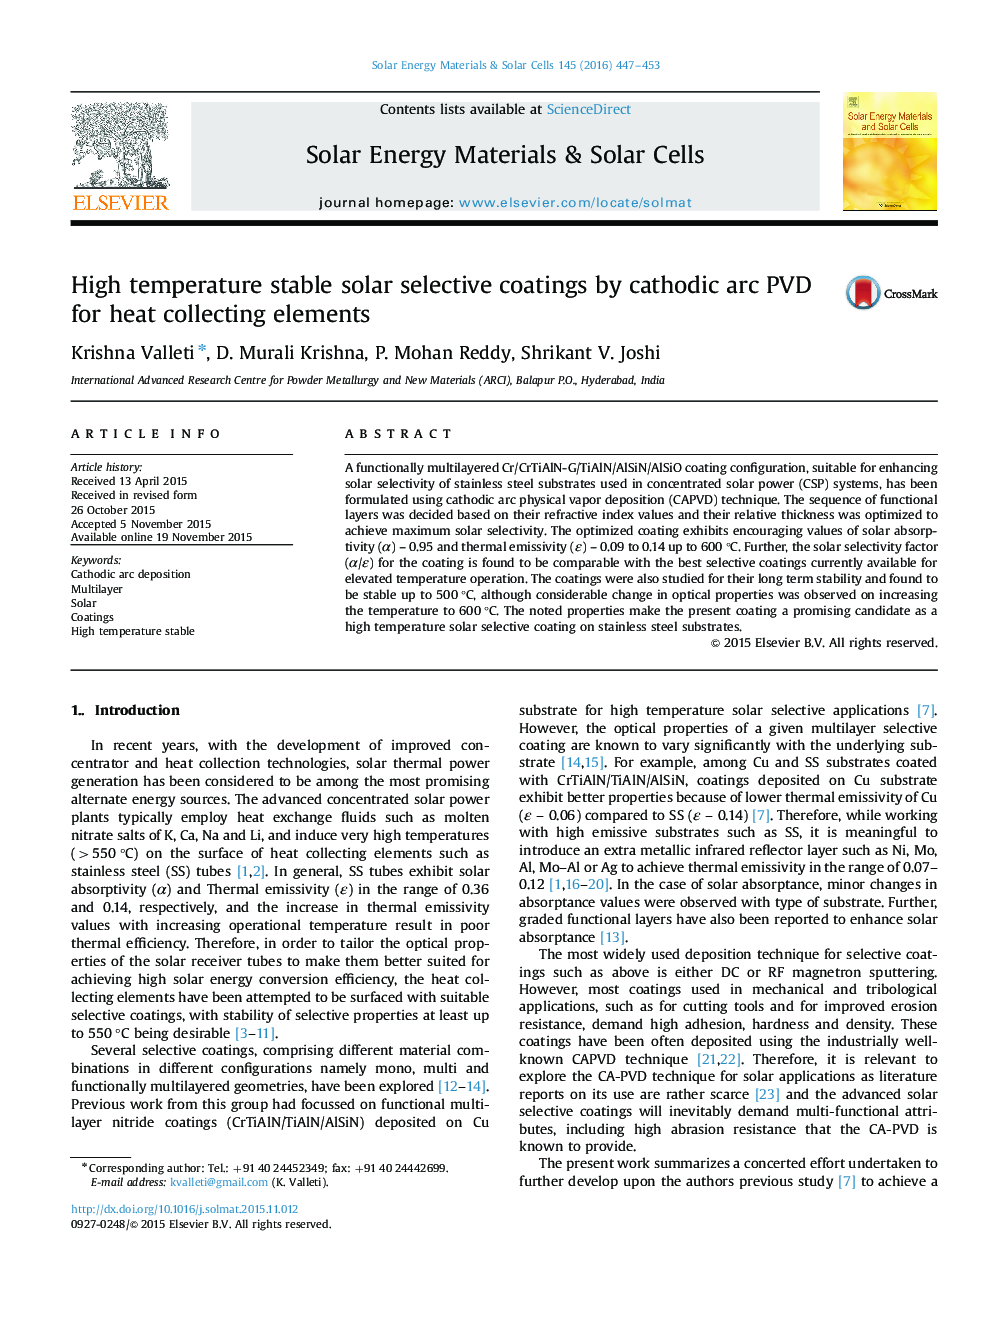 High temperature stable solar selective coatings by cathodic arc PVD for heat collecting elements